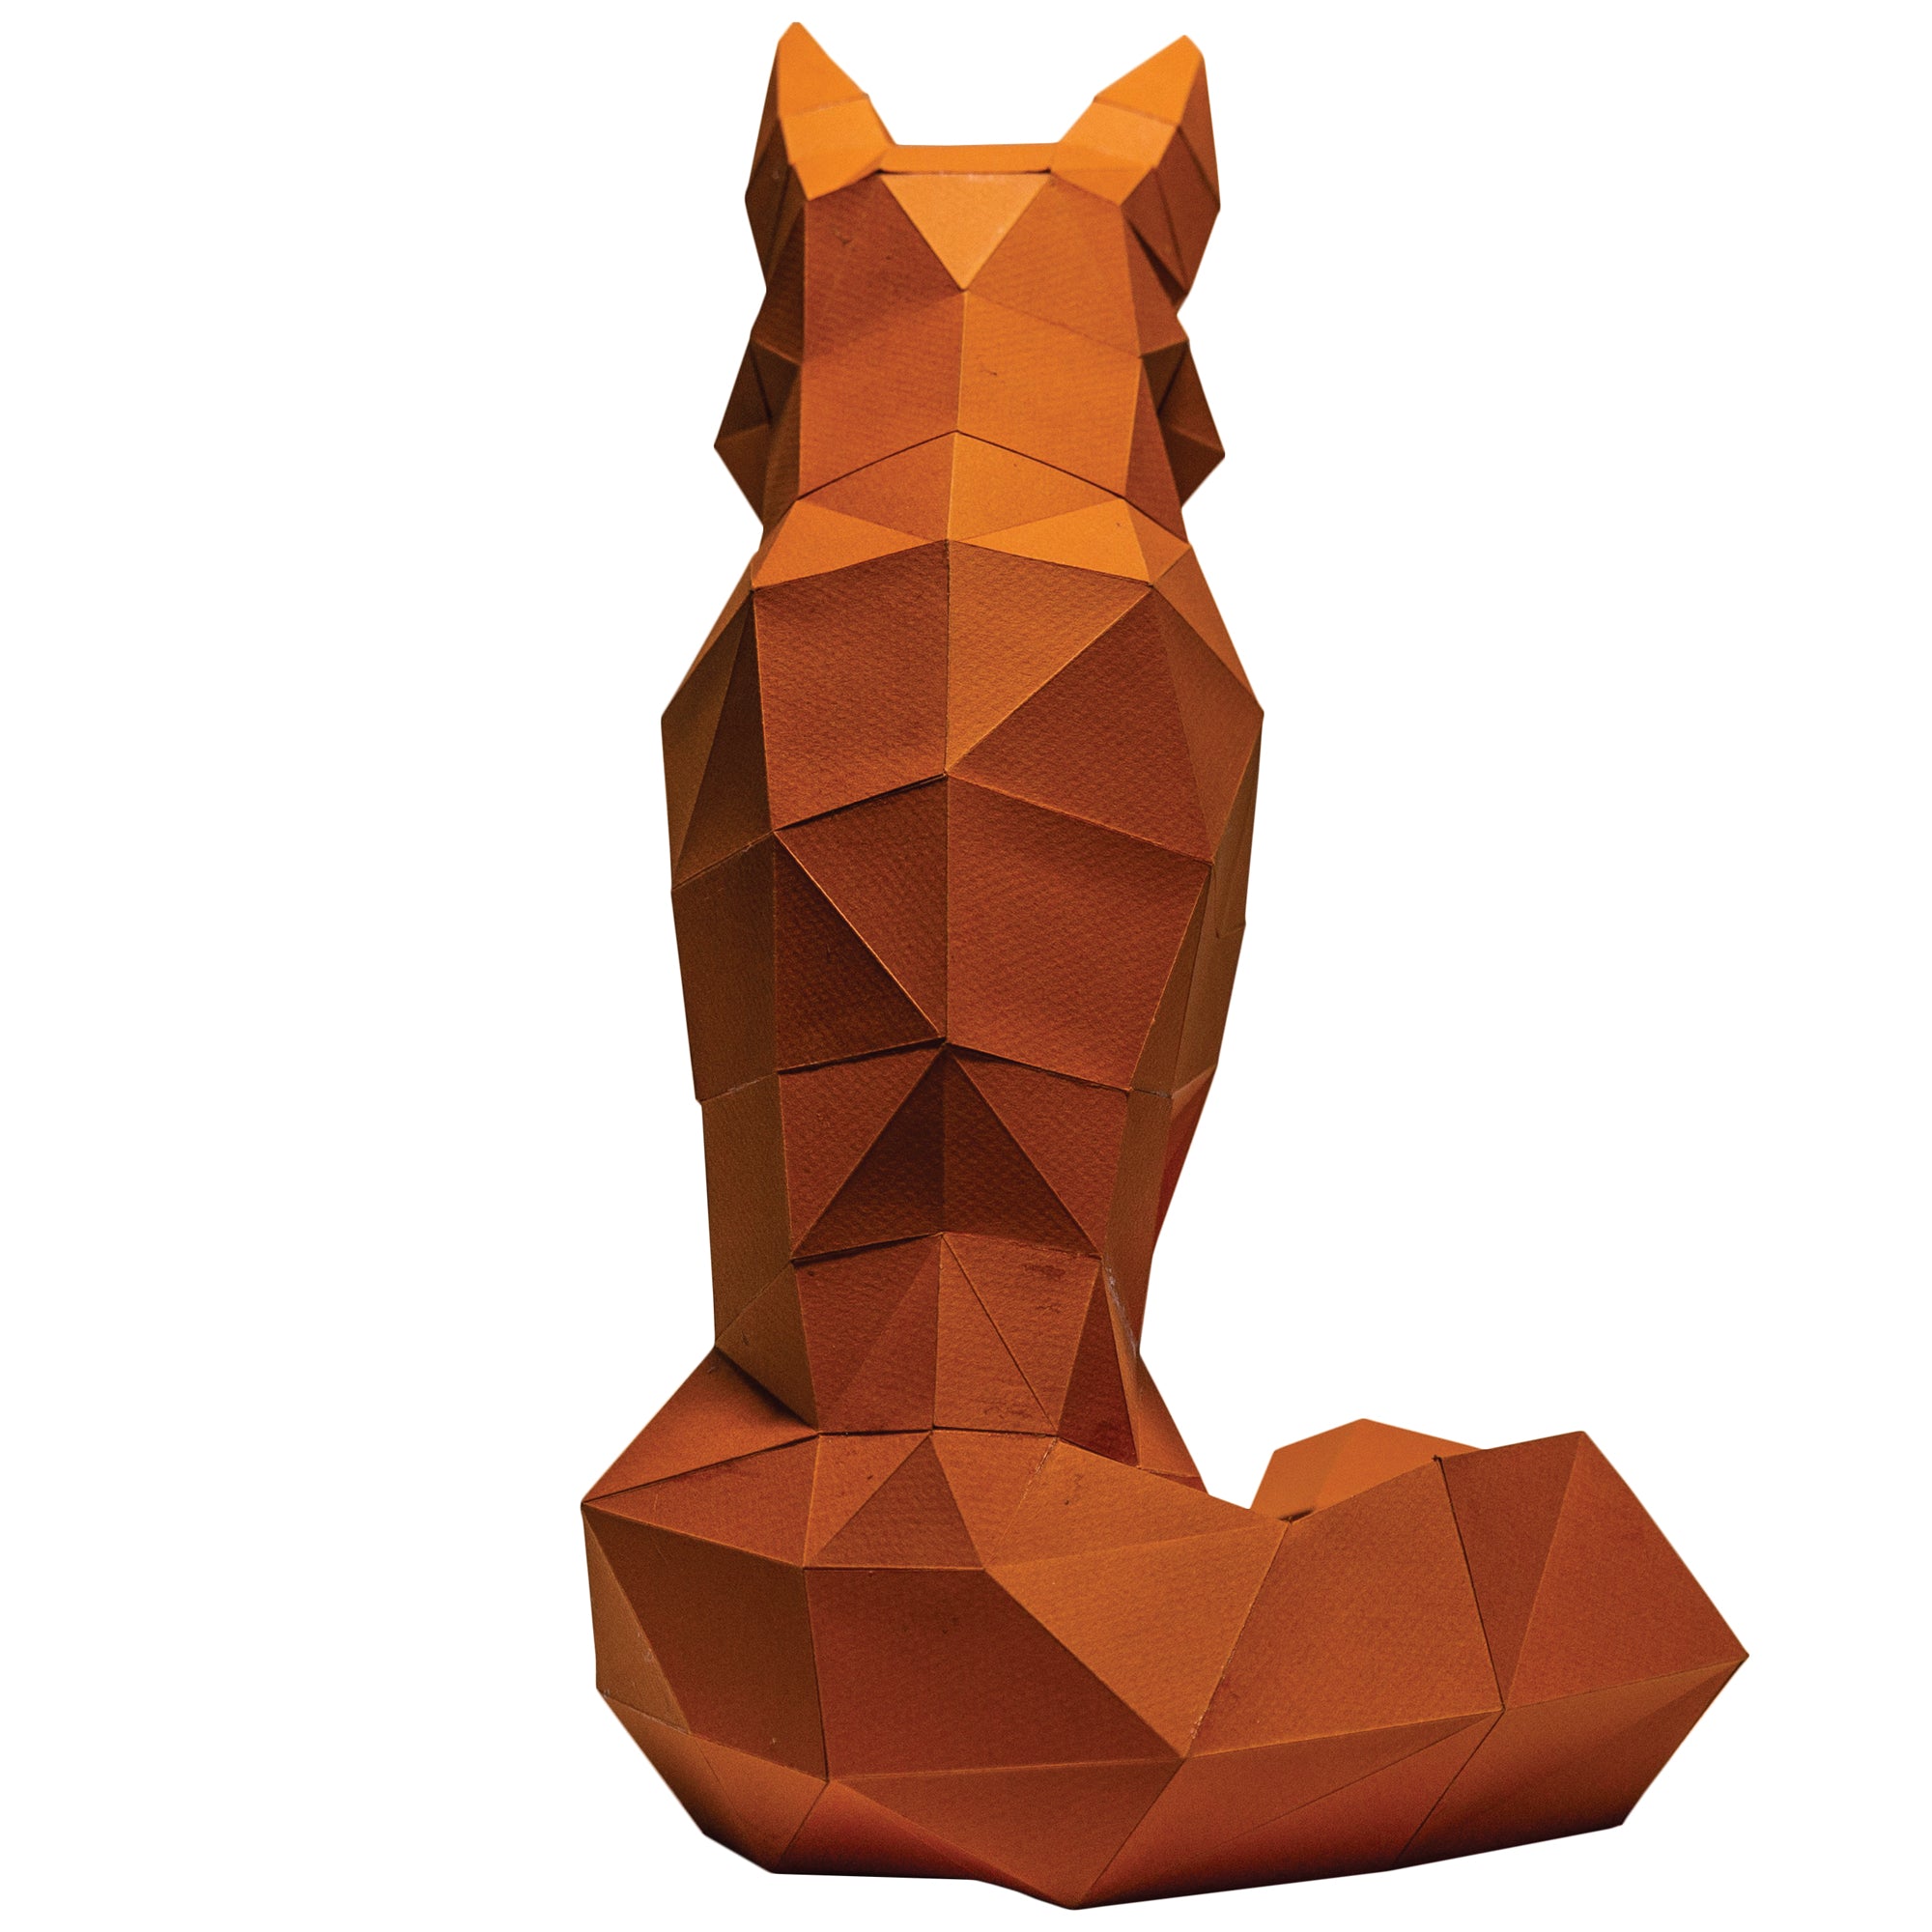 Back view of a Papercraft fox on a white background. Geometrical-shaped fox that is folded and cut paper pieces glued together. Fox is mainly a dark orange.